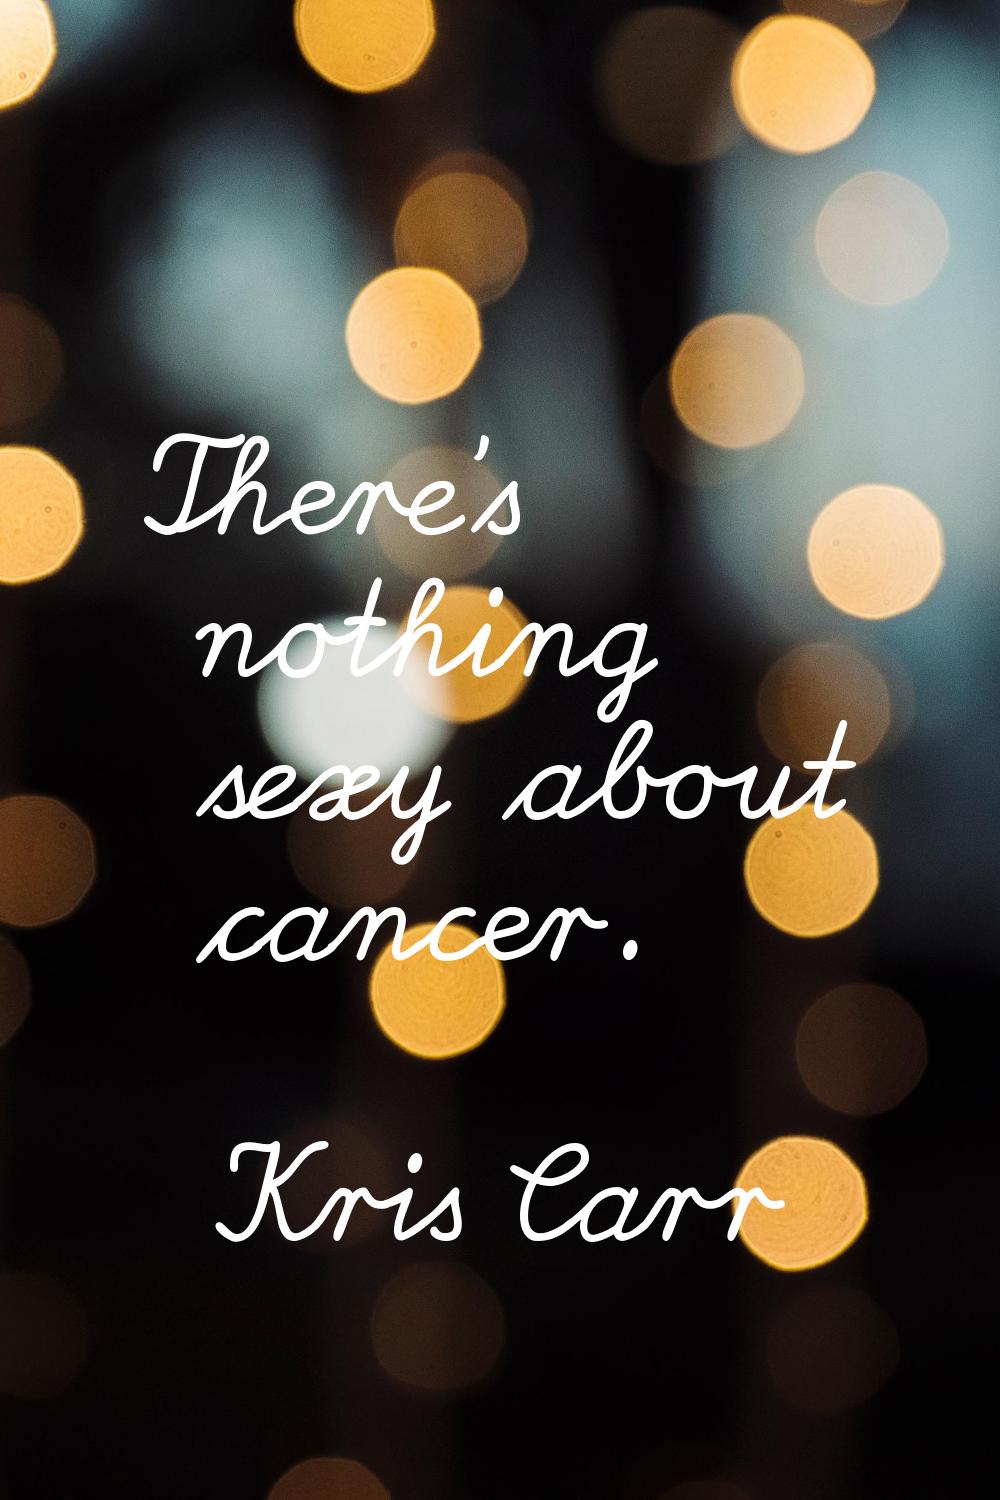 There's nothing sexy about cancer.